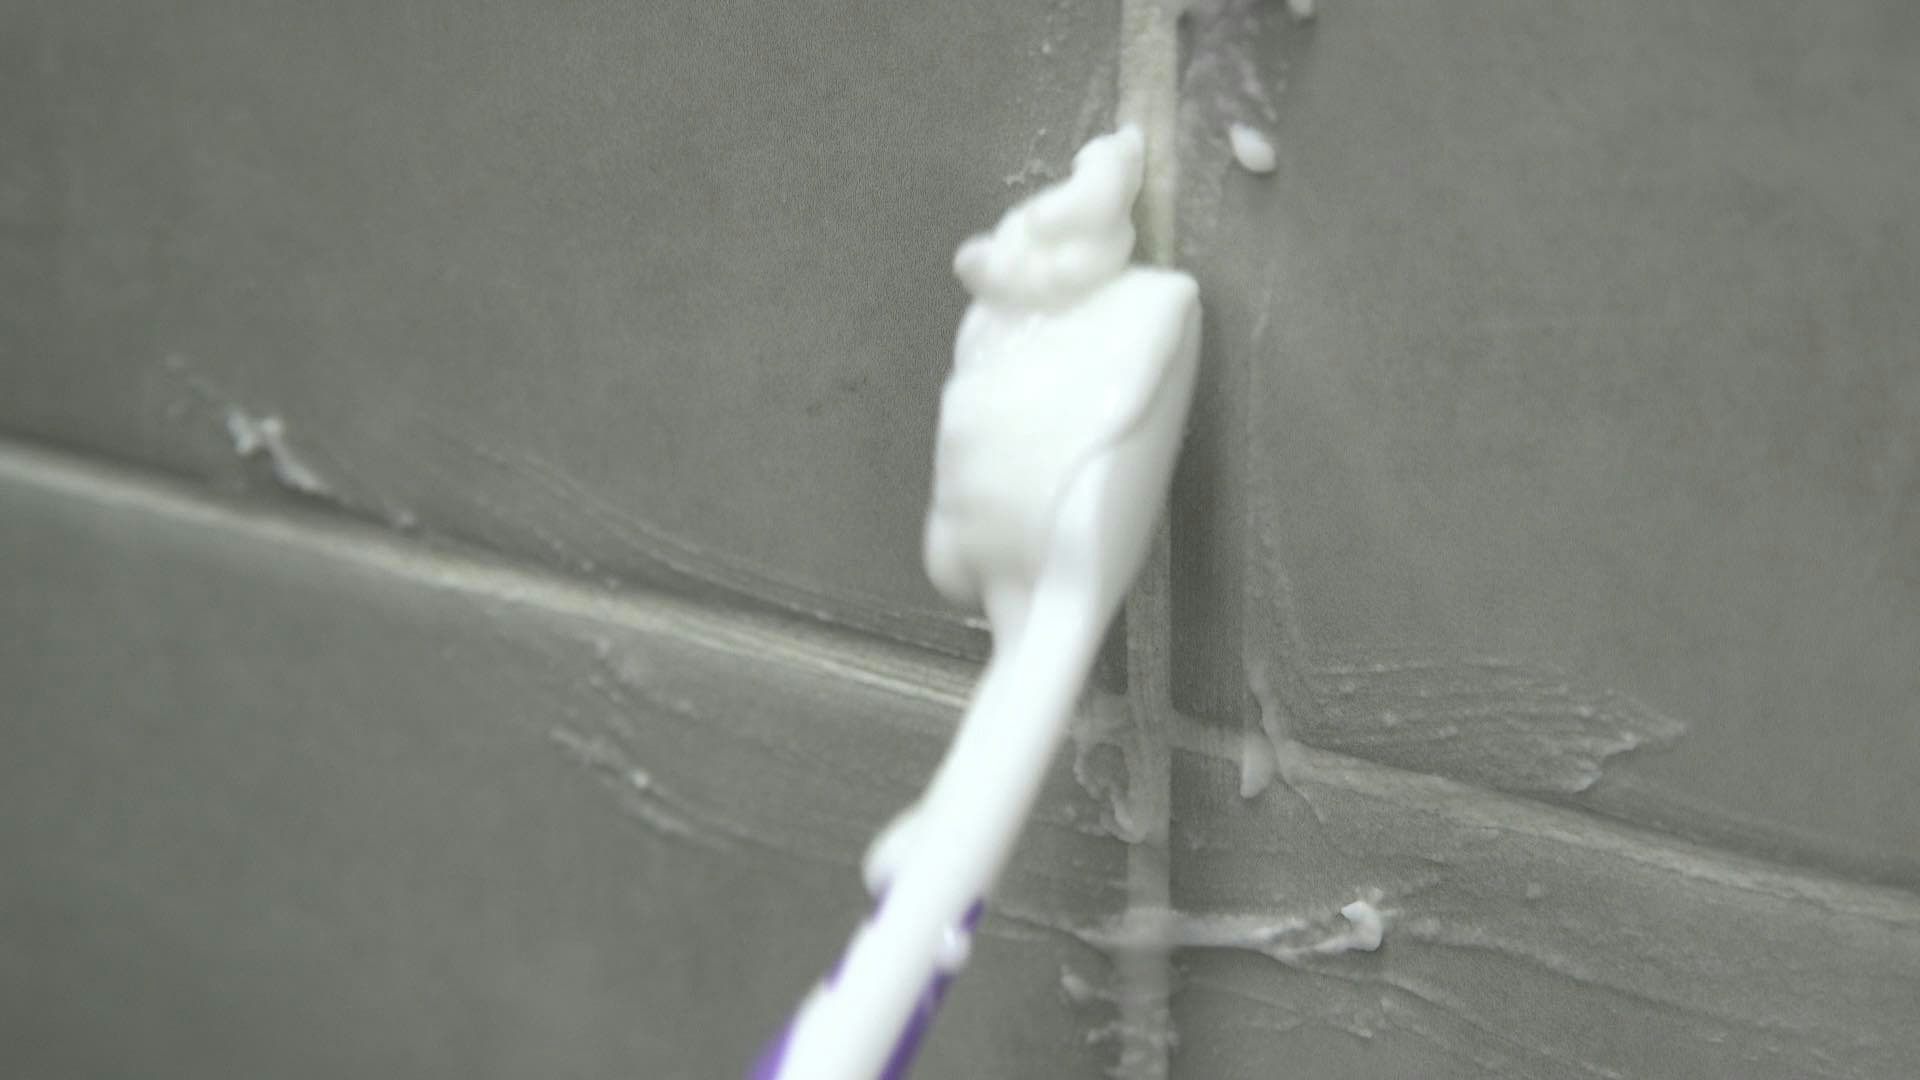 Scrubbing grout lines with a toothbrush